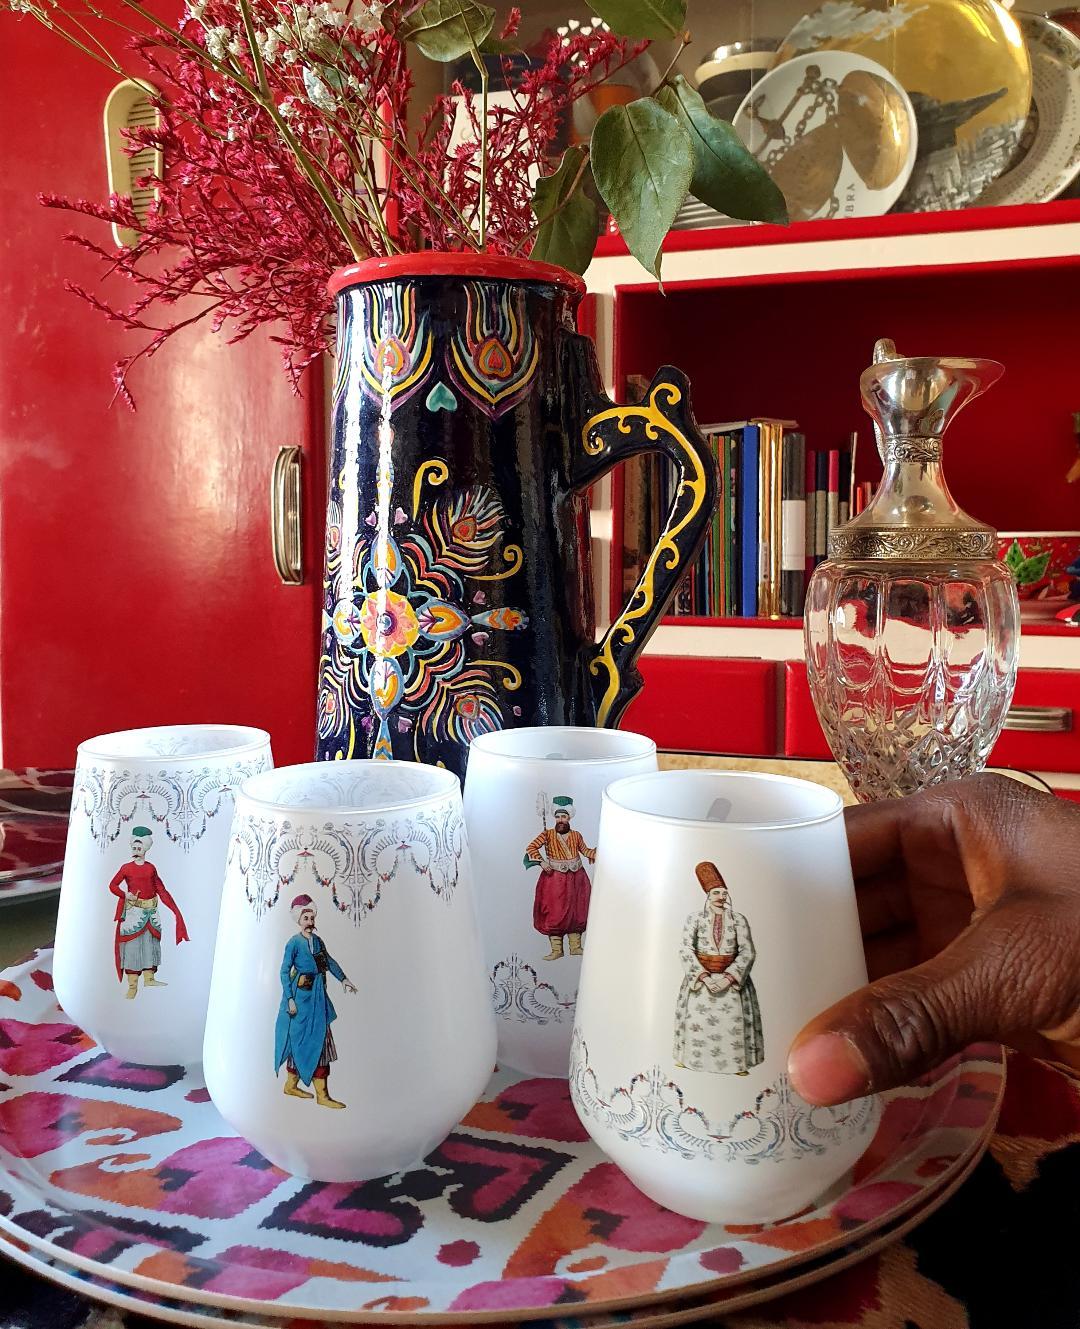 Our unusual table is completed with these wonderful glasses representing ottoman caracthers.